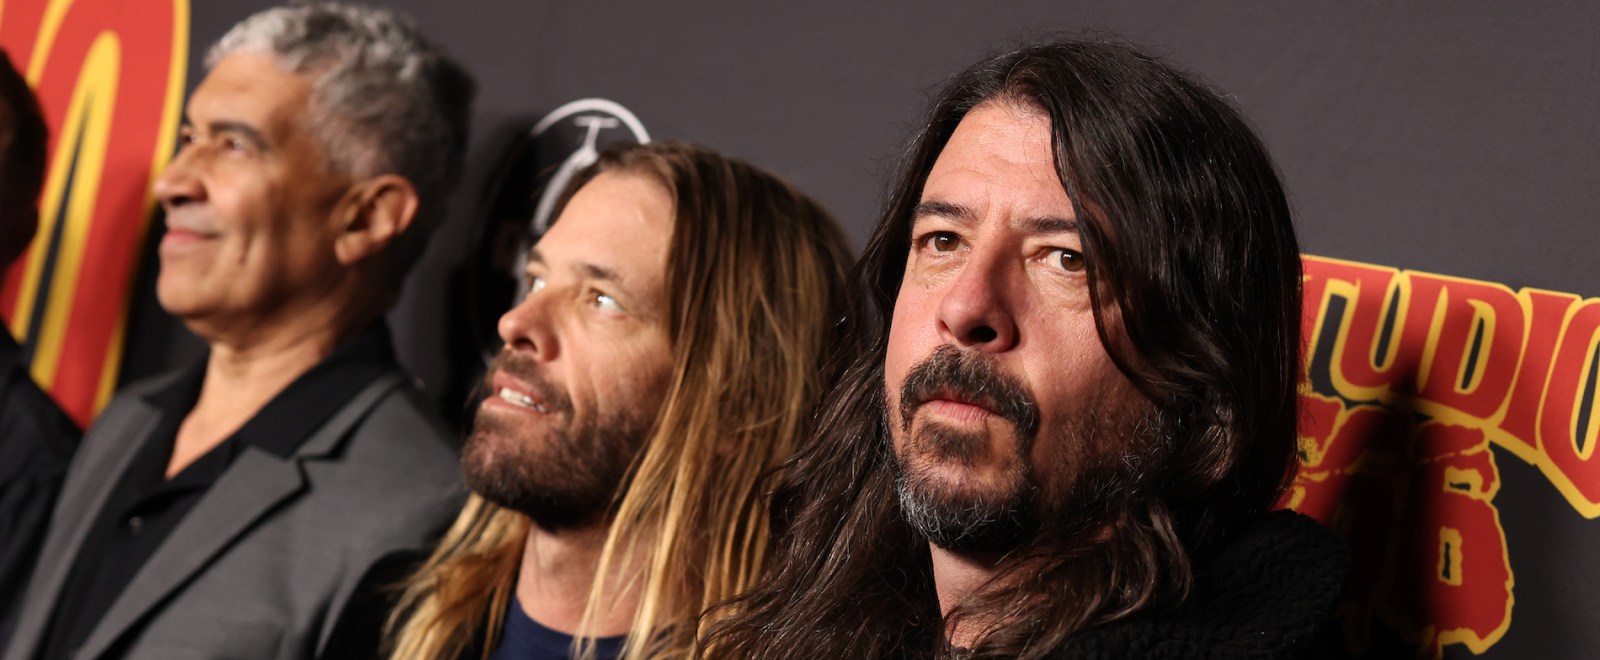 Foo Fighters Pat Smear Taylor Hawkins Dave Grohl Studio 666 Premiere 2022